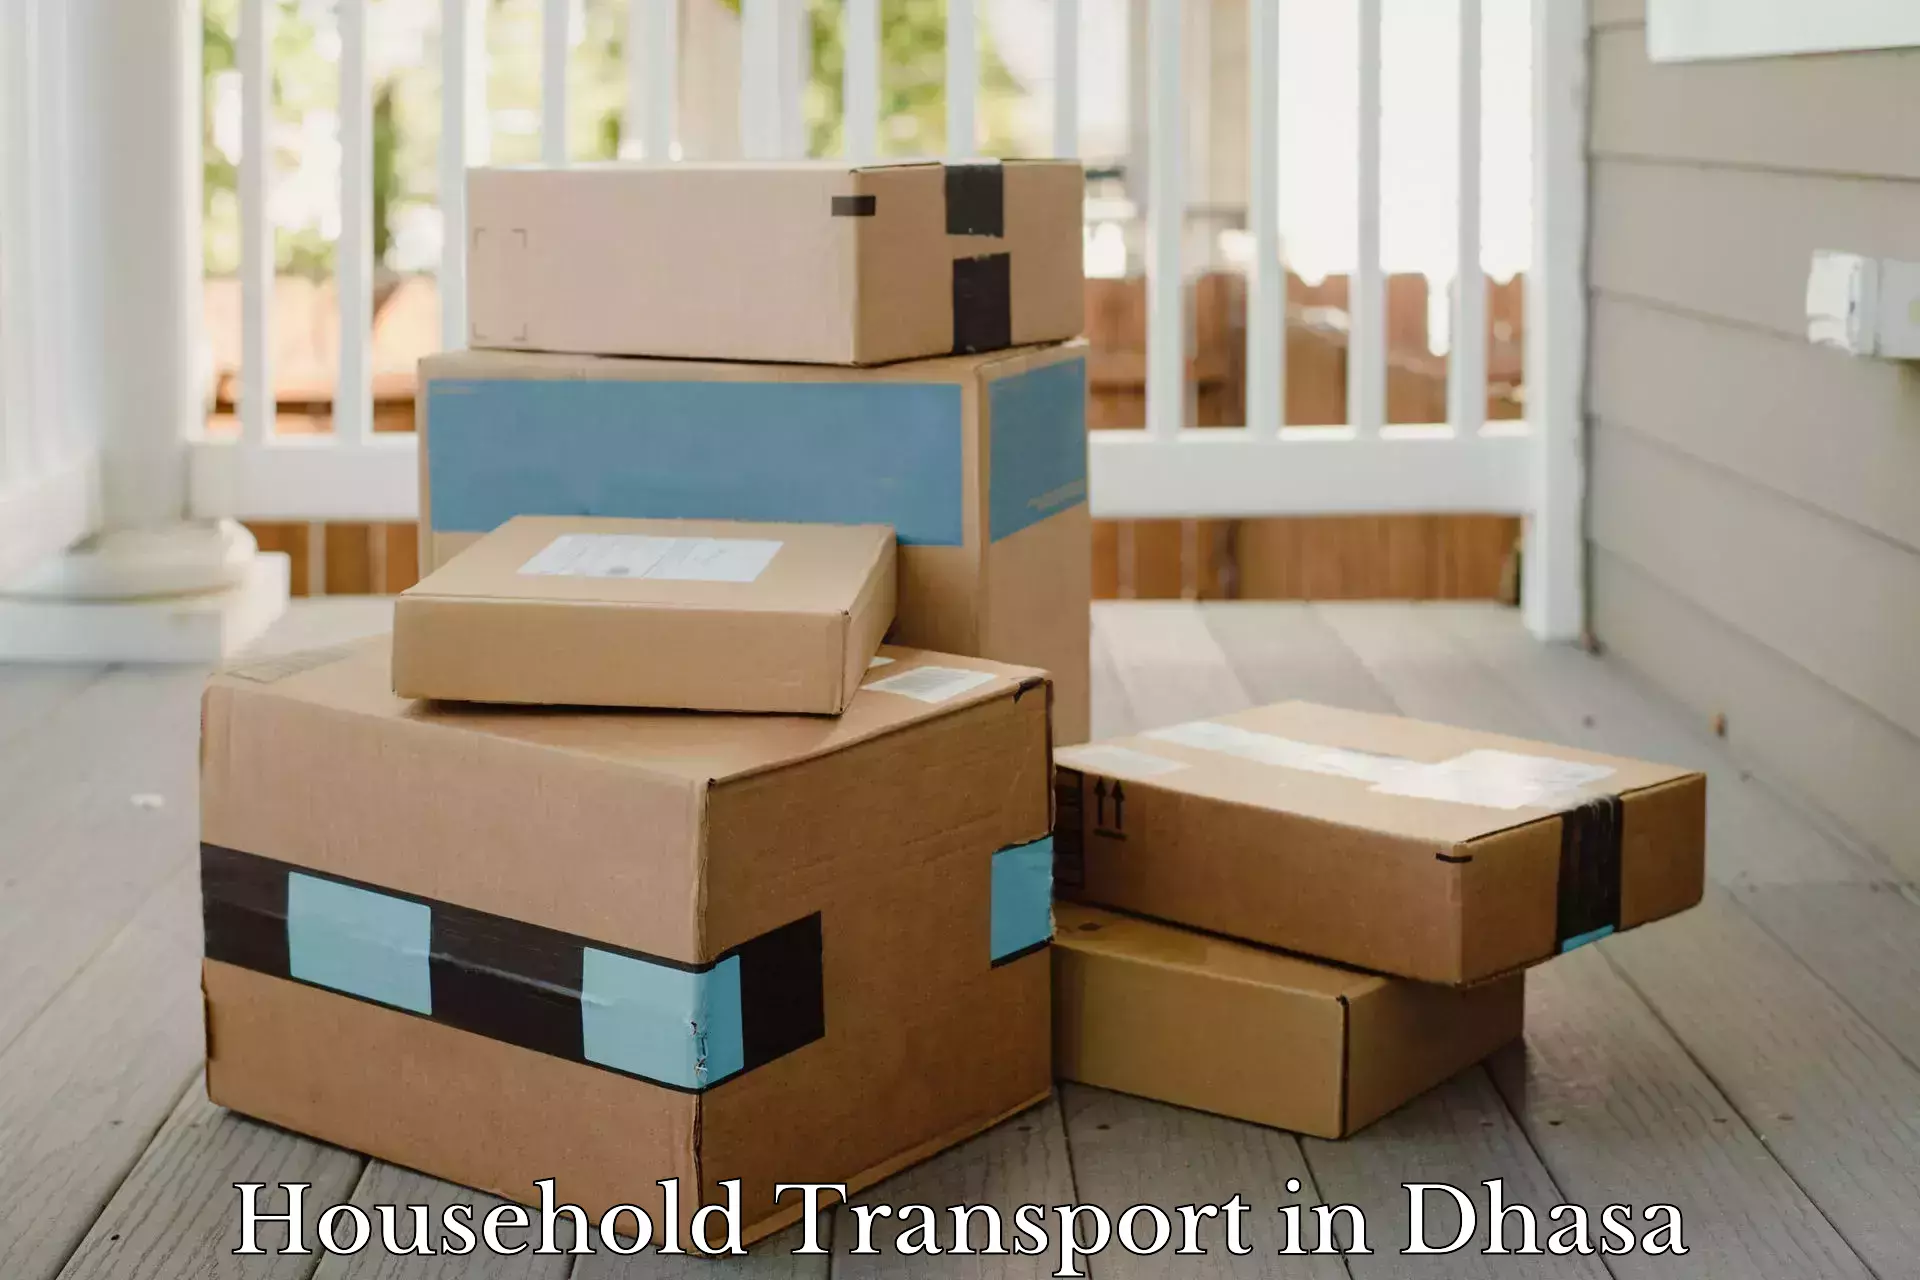 Professional goods transport in Dhasa